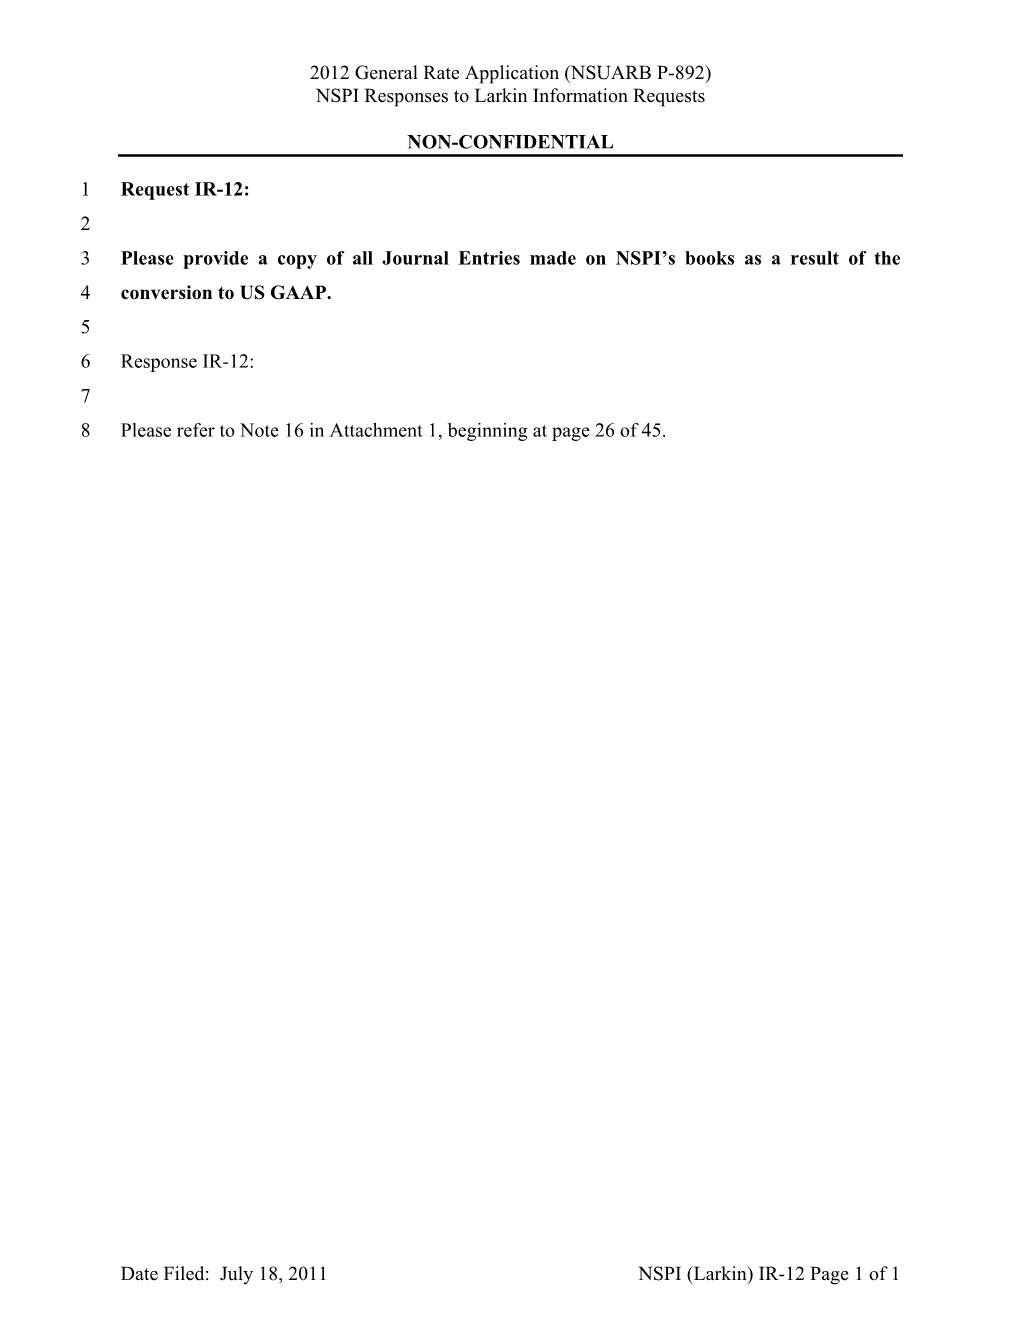 2012 General Rate Application (NSUARB P-892) NSPI Responses to Larkin Information Requests